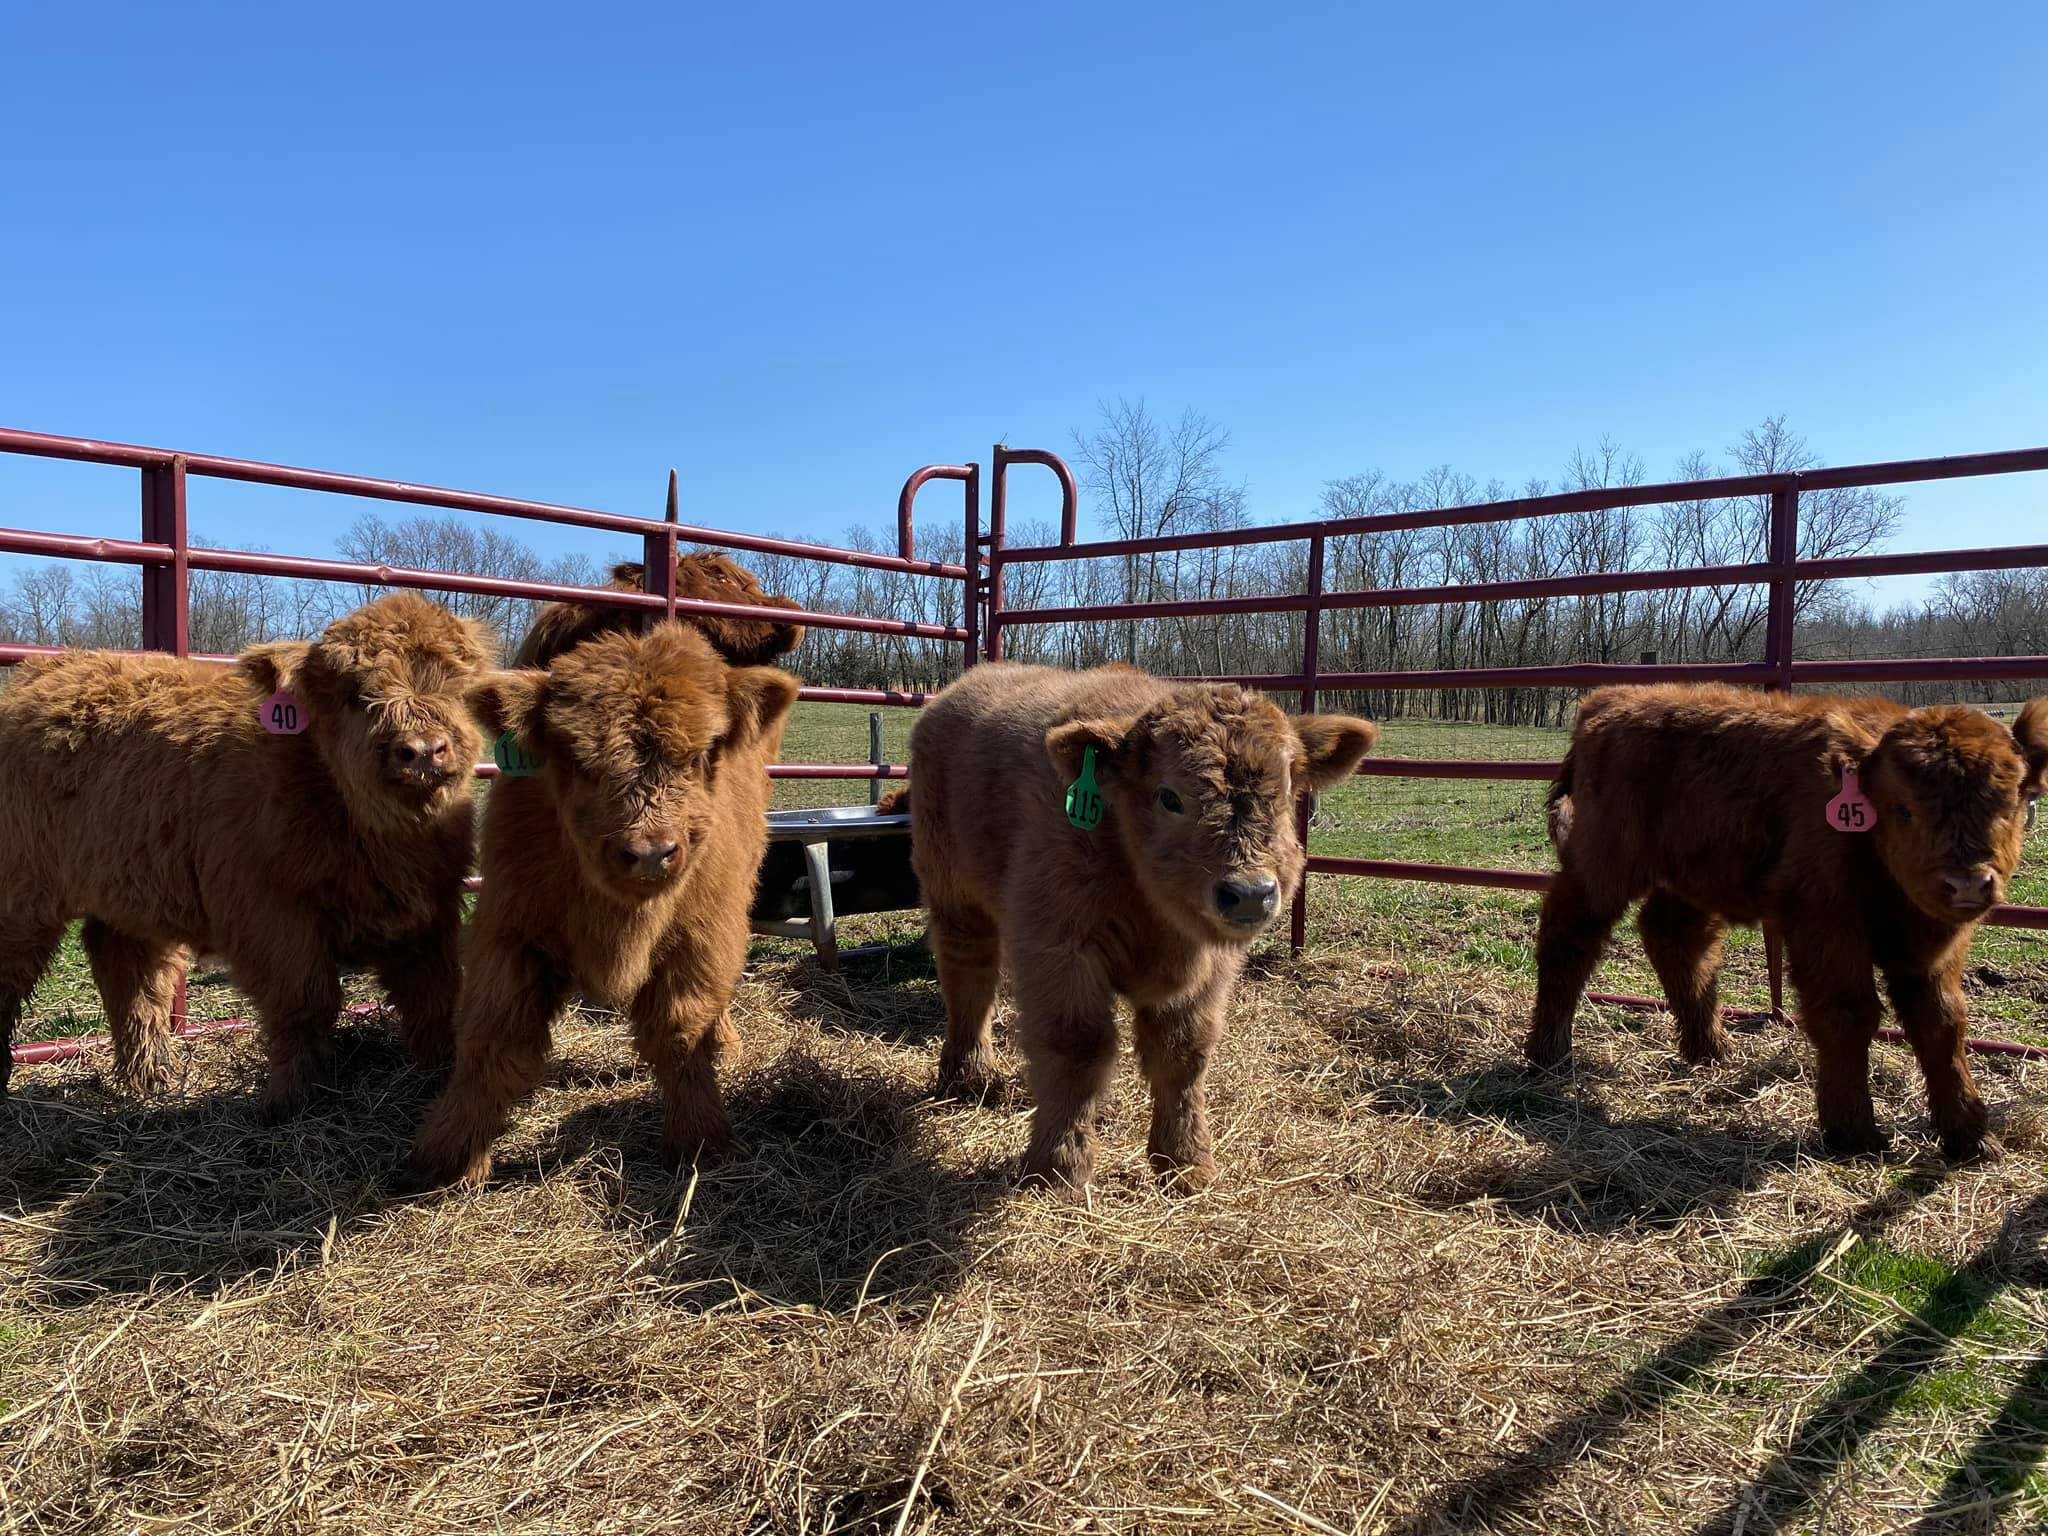 This farm in Kentucky is home to cows so fluffy, you'll want to hug them